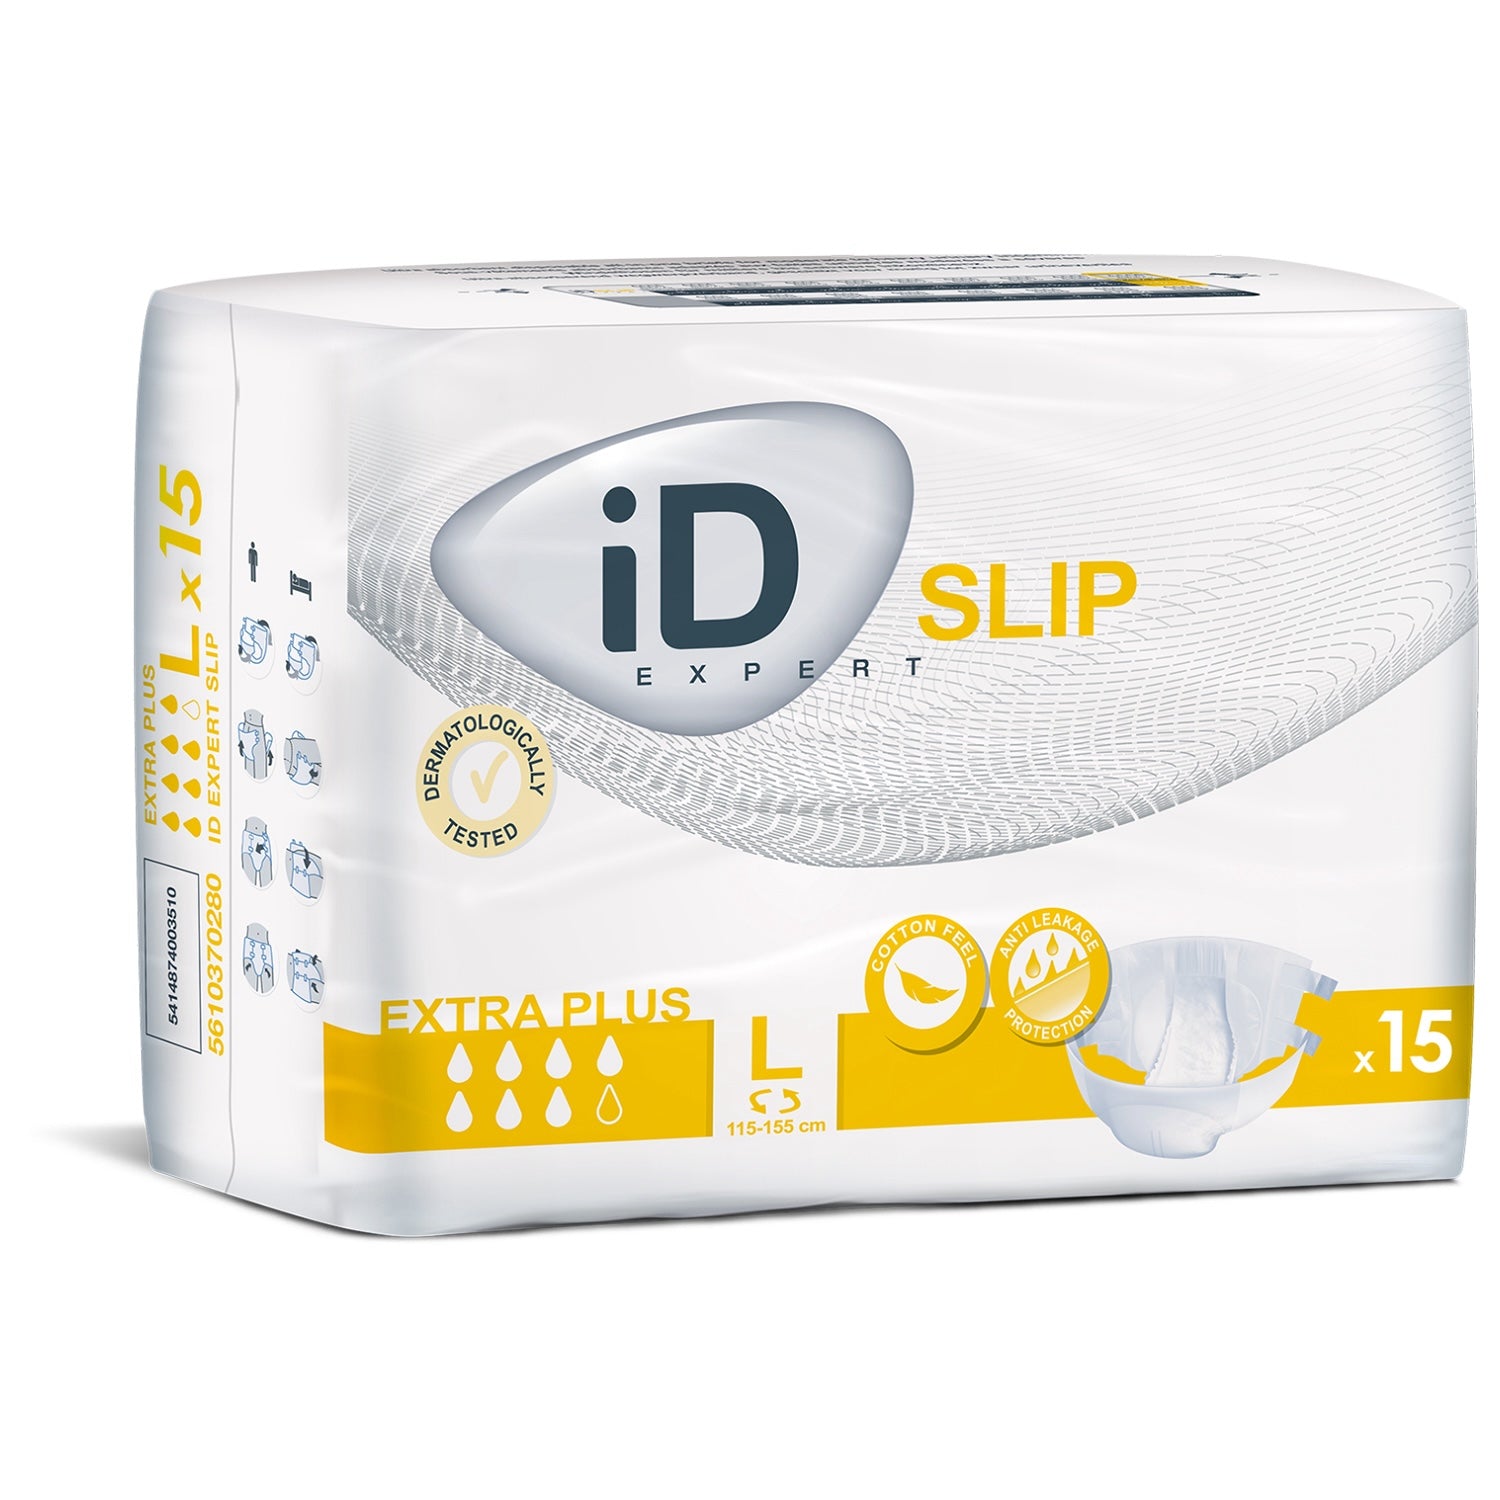 iD Slip TBS Plus Large | Pack of 15 | Case of 6 (15 x 6 Pieces) (1)